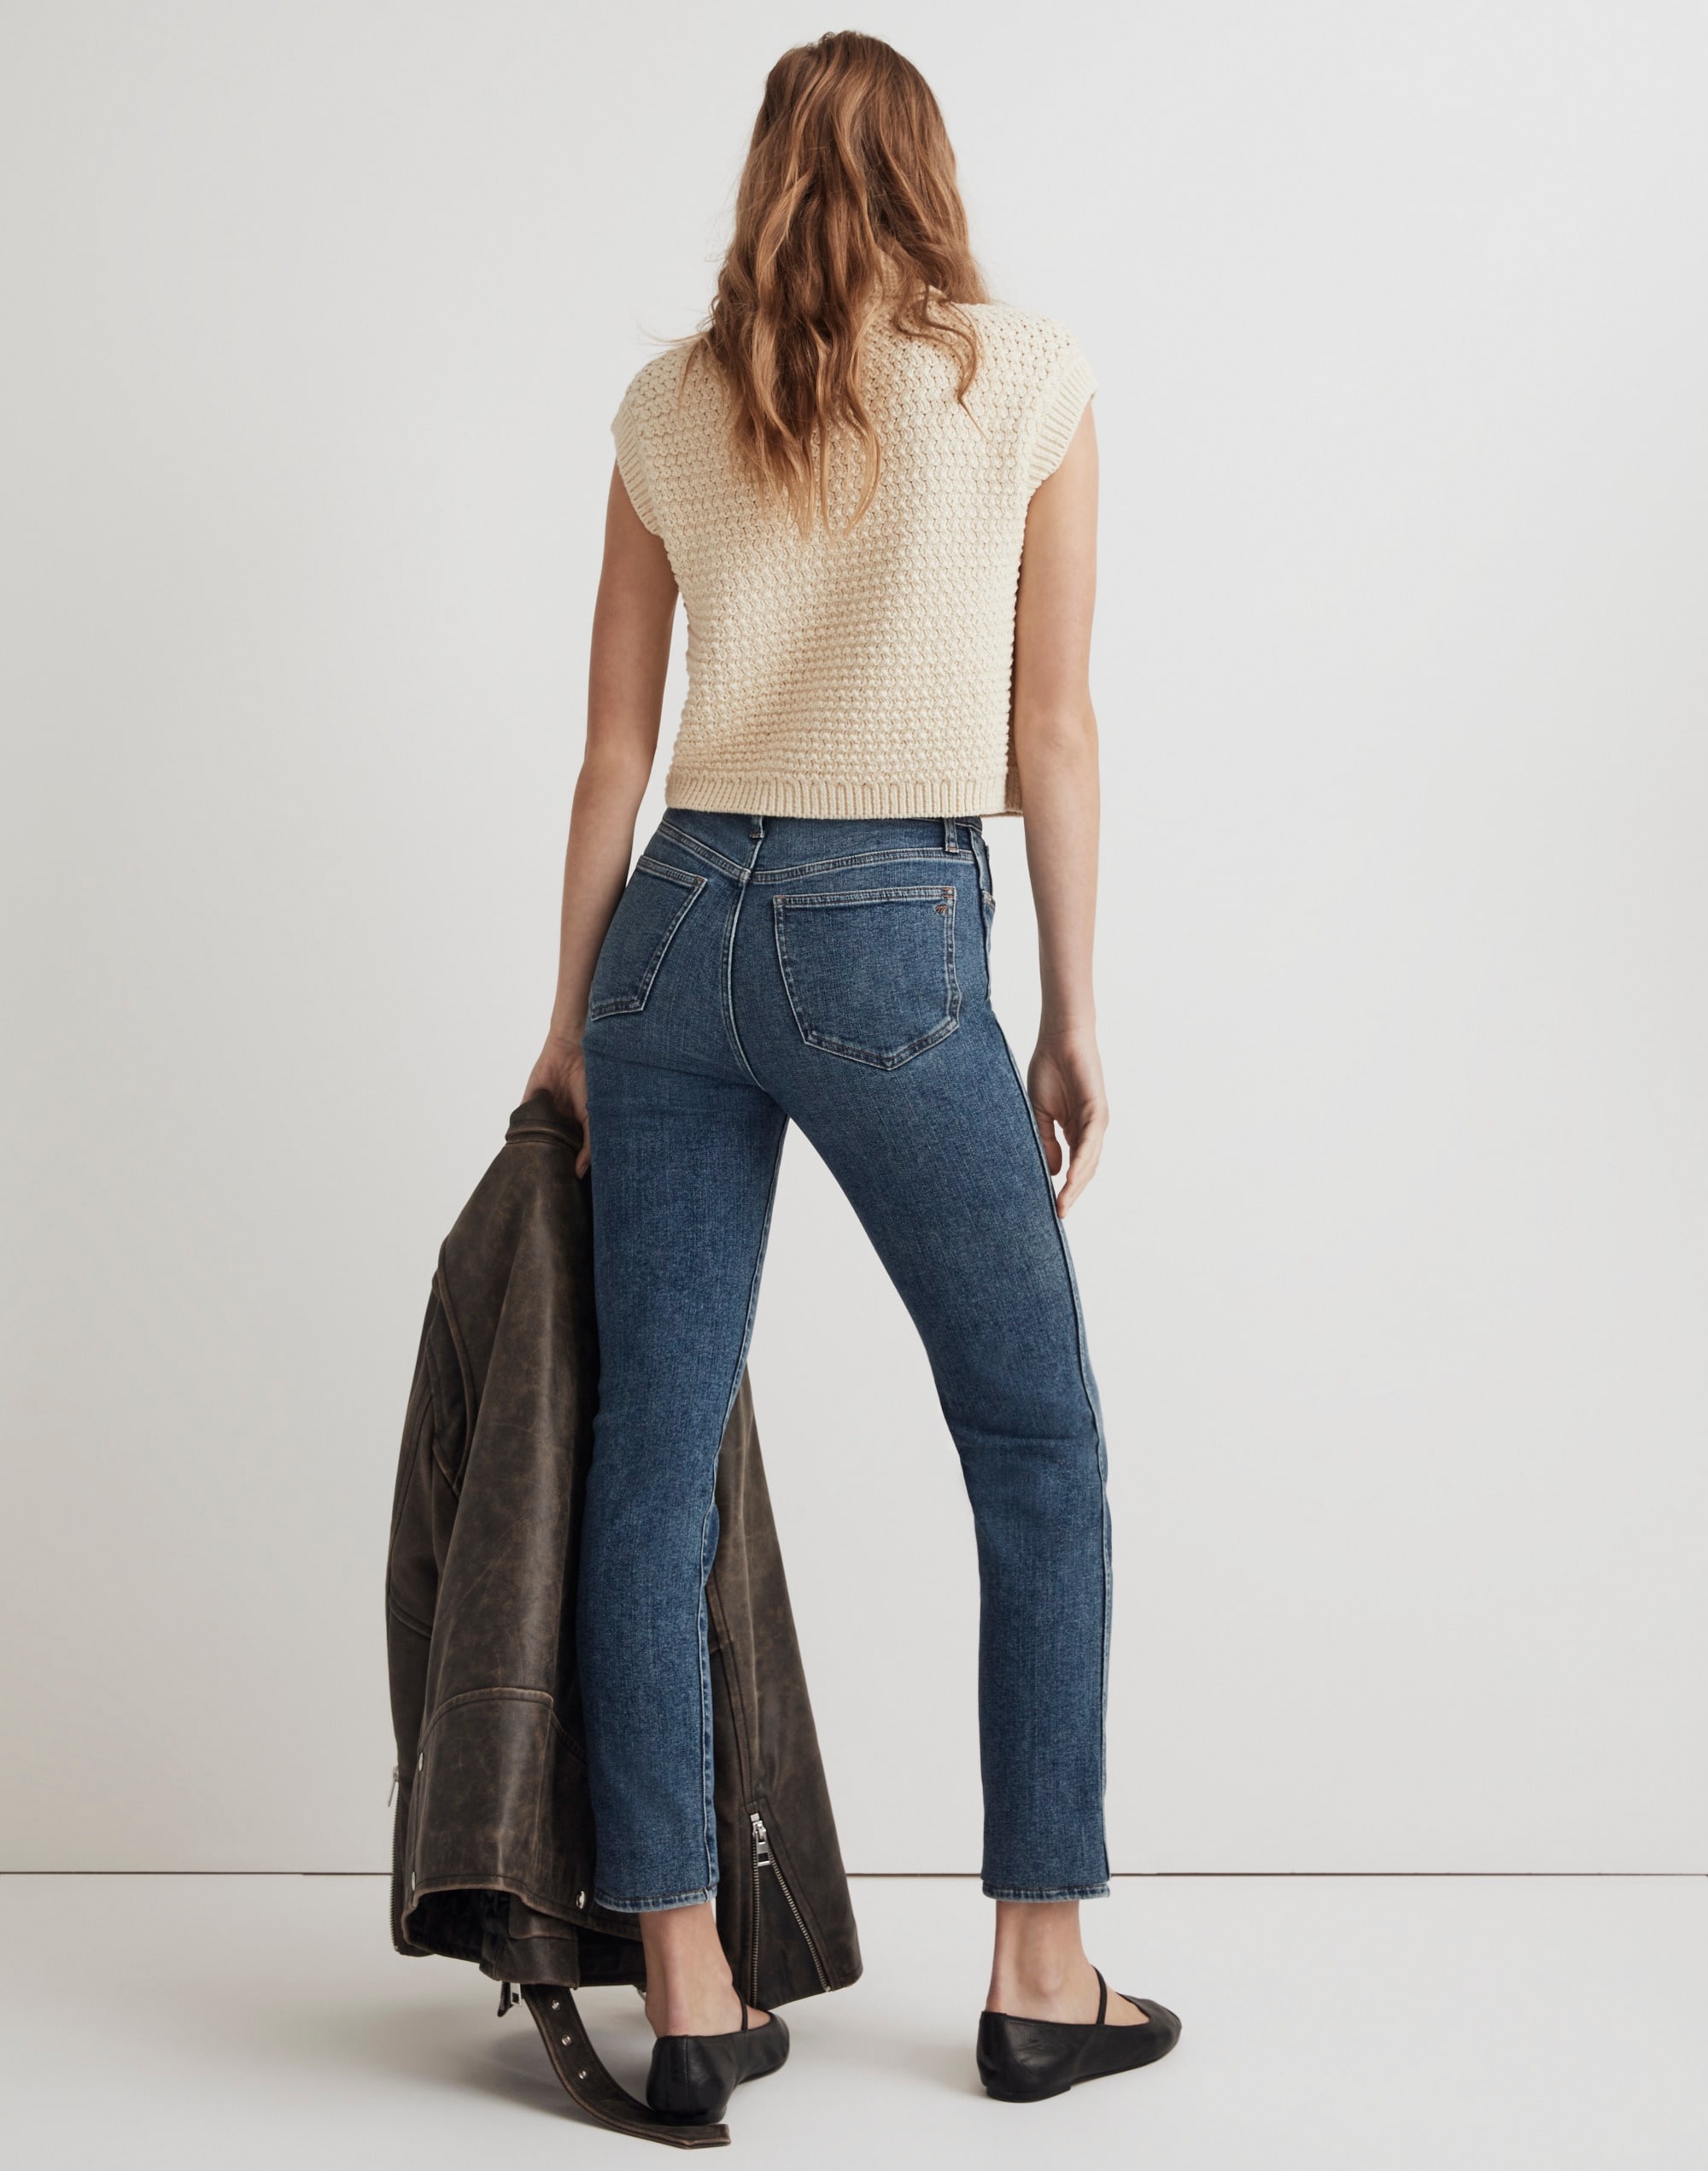 Stovepipe Full-Length Jeans in Vinter Wash: Instacozy Edition